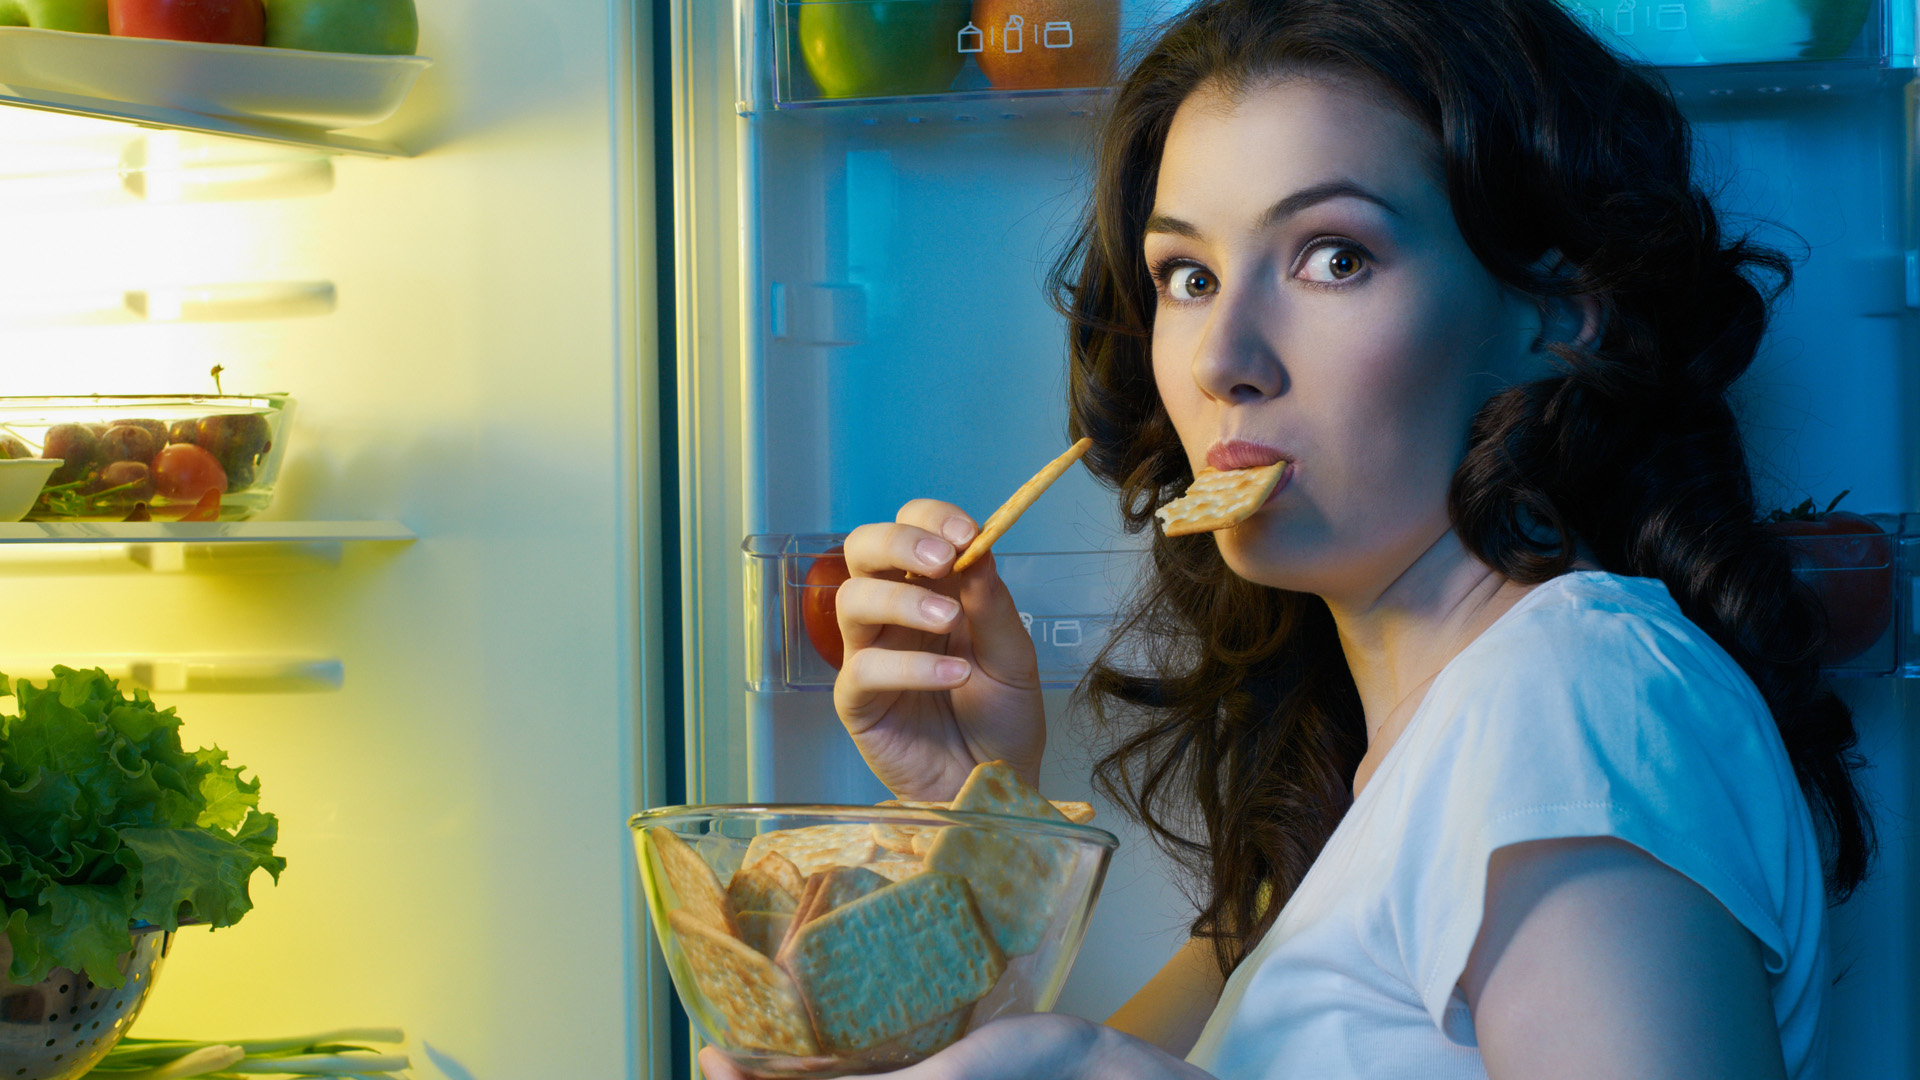 Brunette woman holding a bowl of graham crackers in front of an open fridge door, eating one while looking guilty.